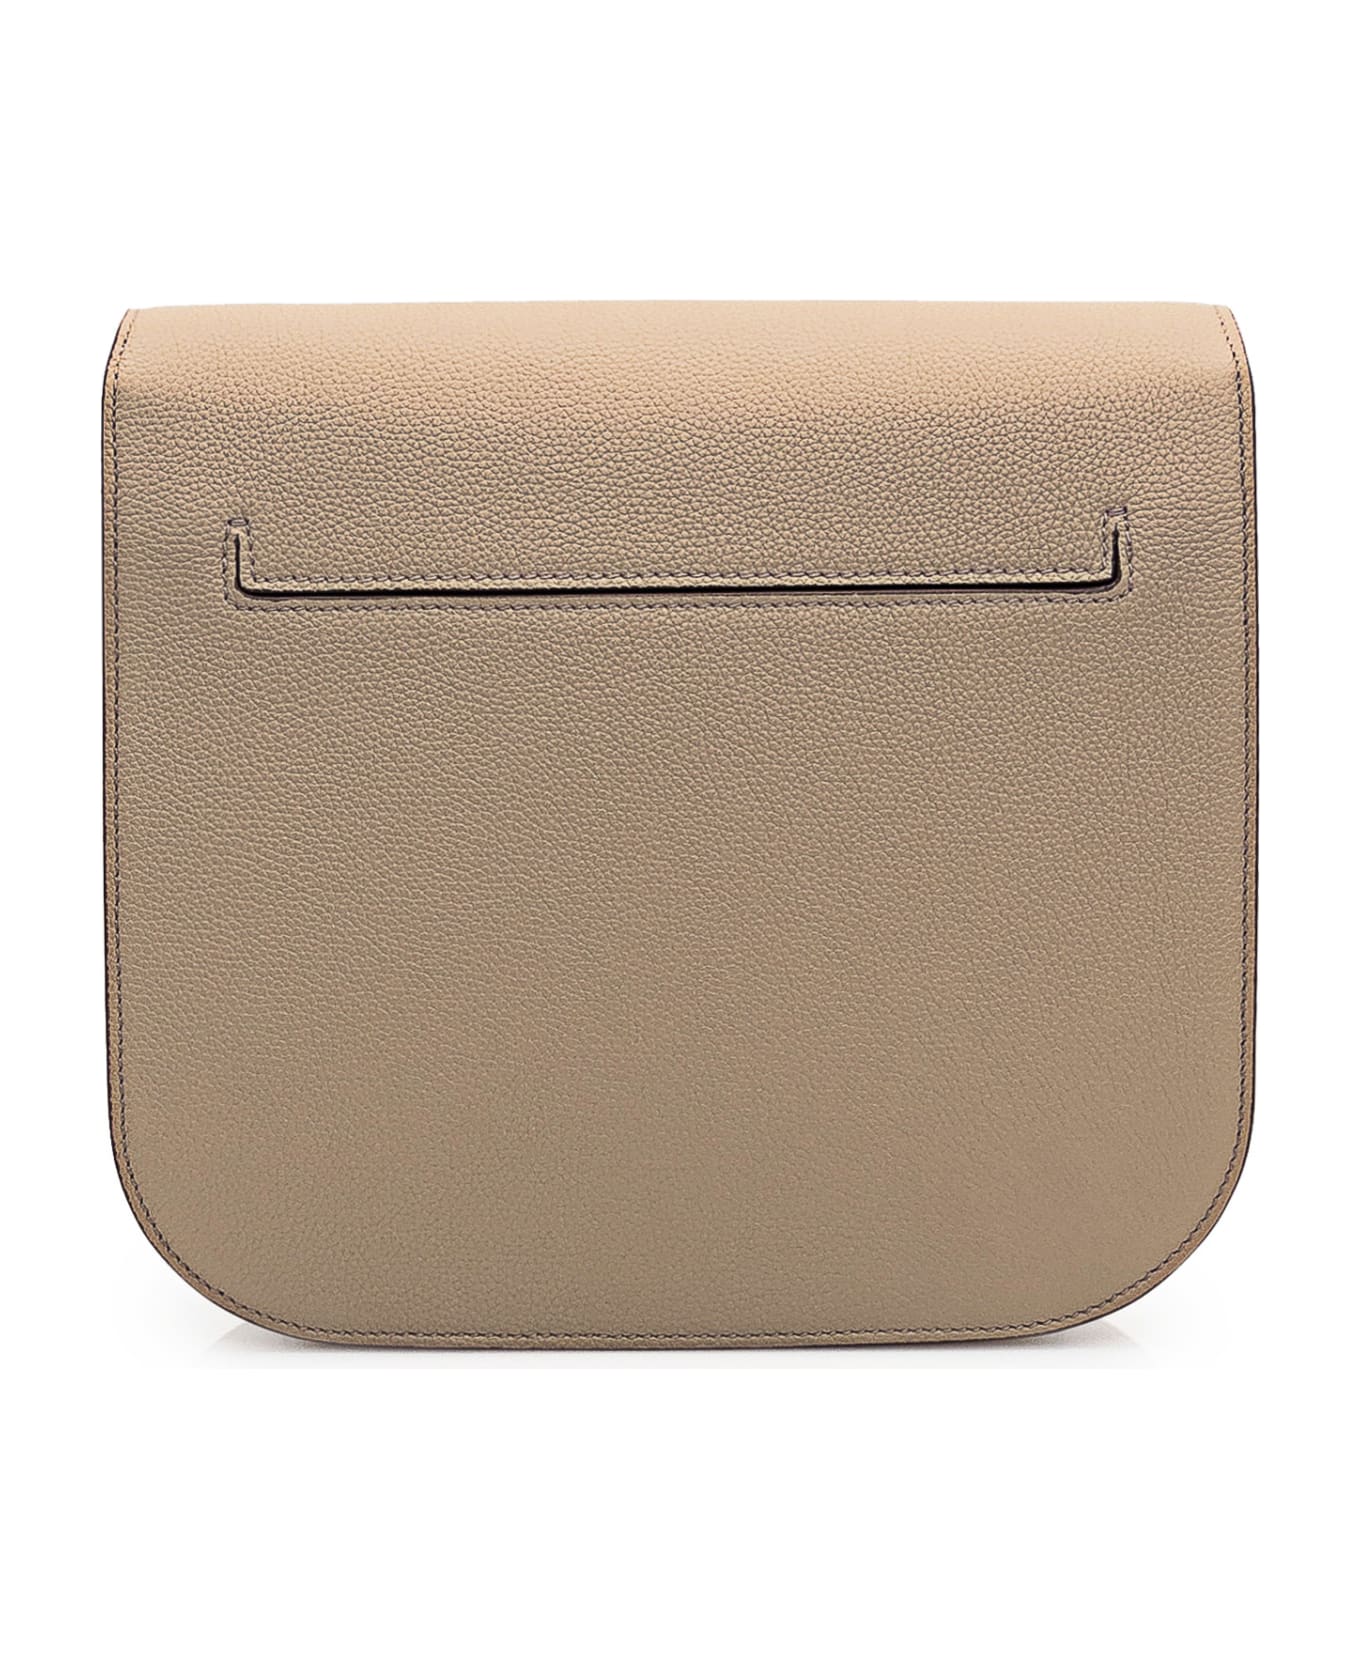 Tom Ford Leather Bag - SILK TAUPE